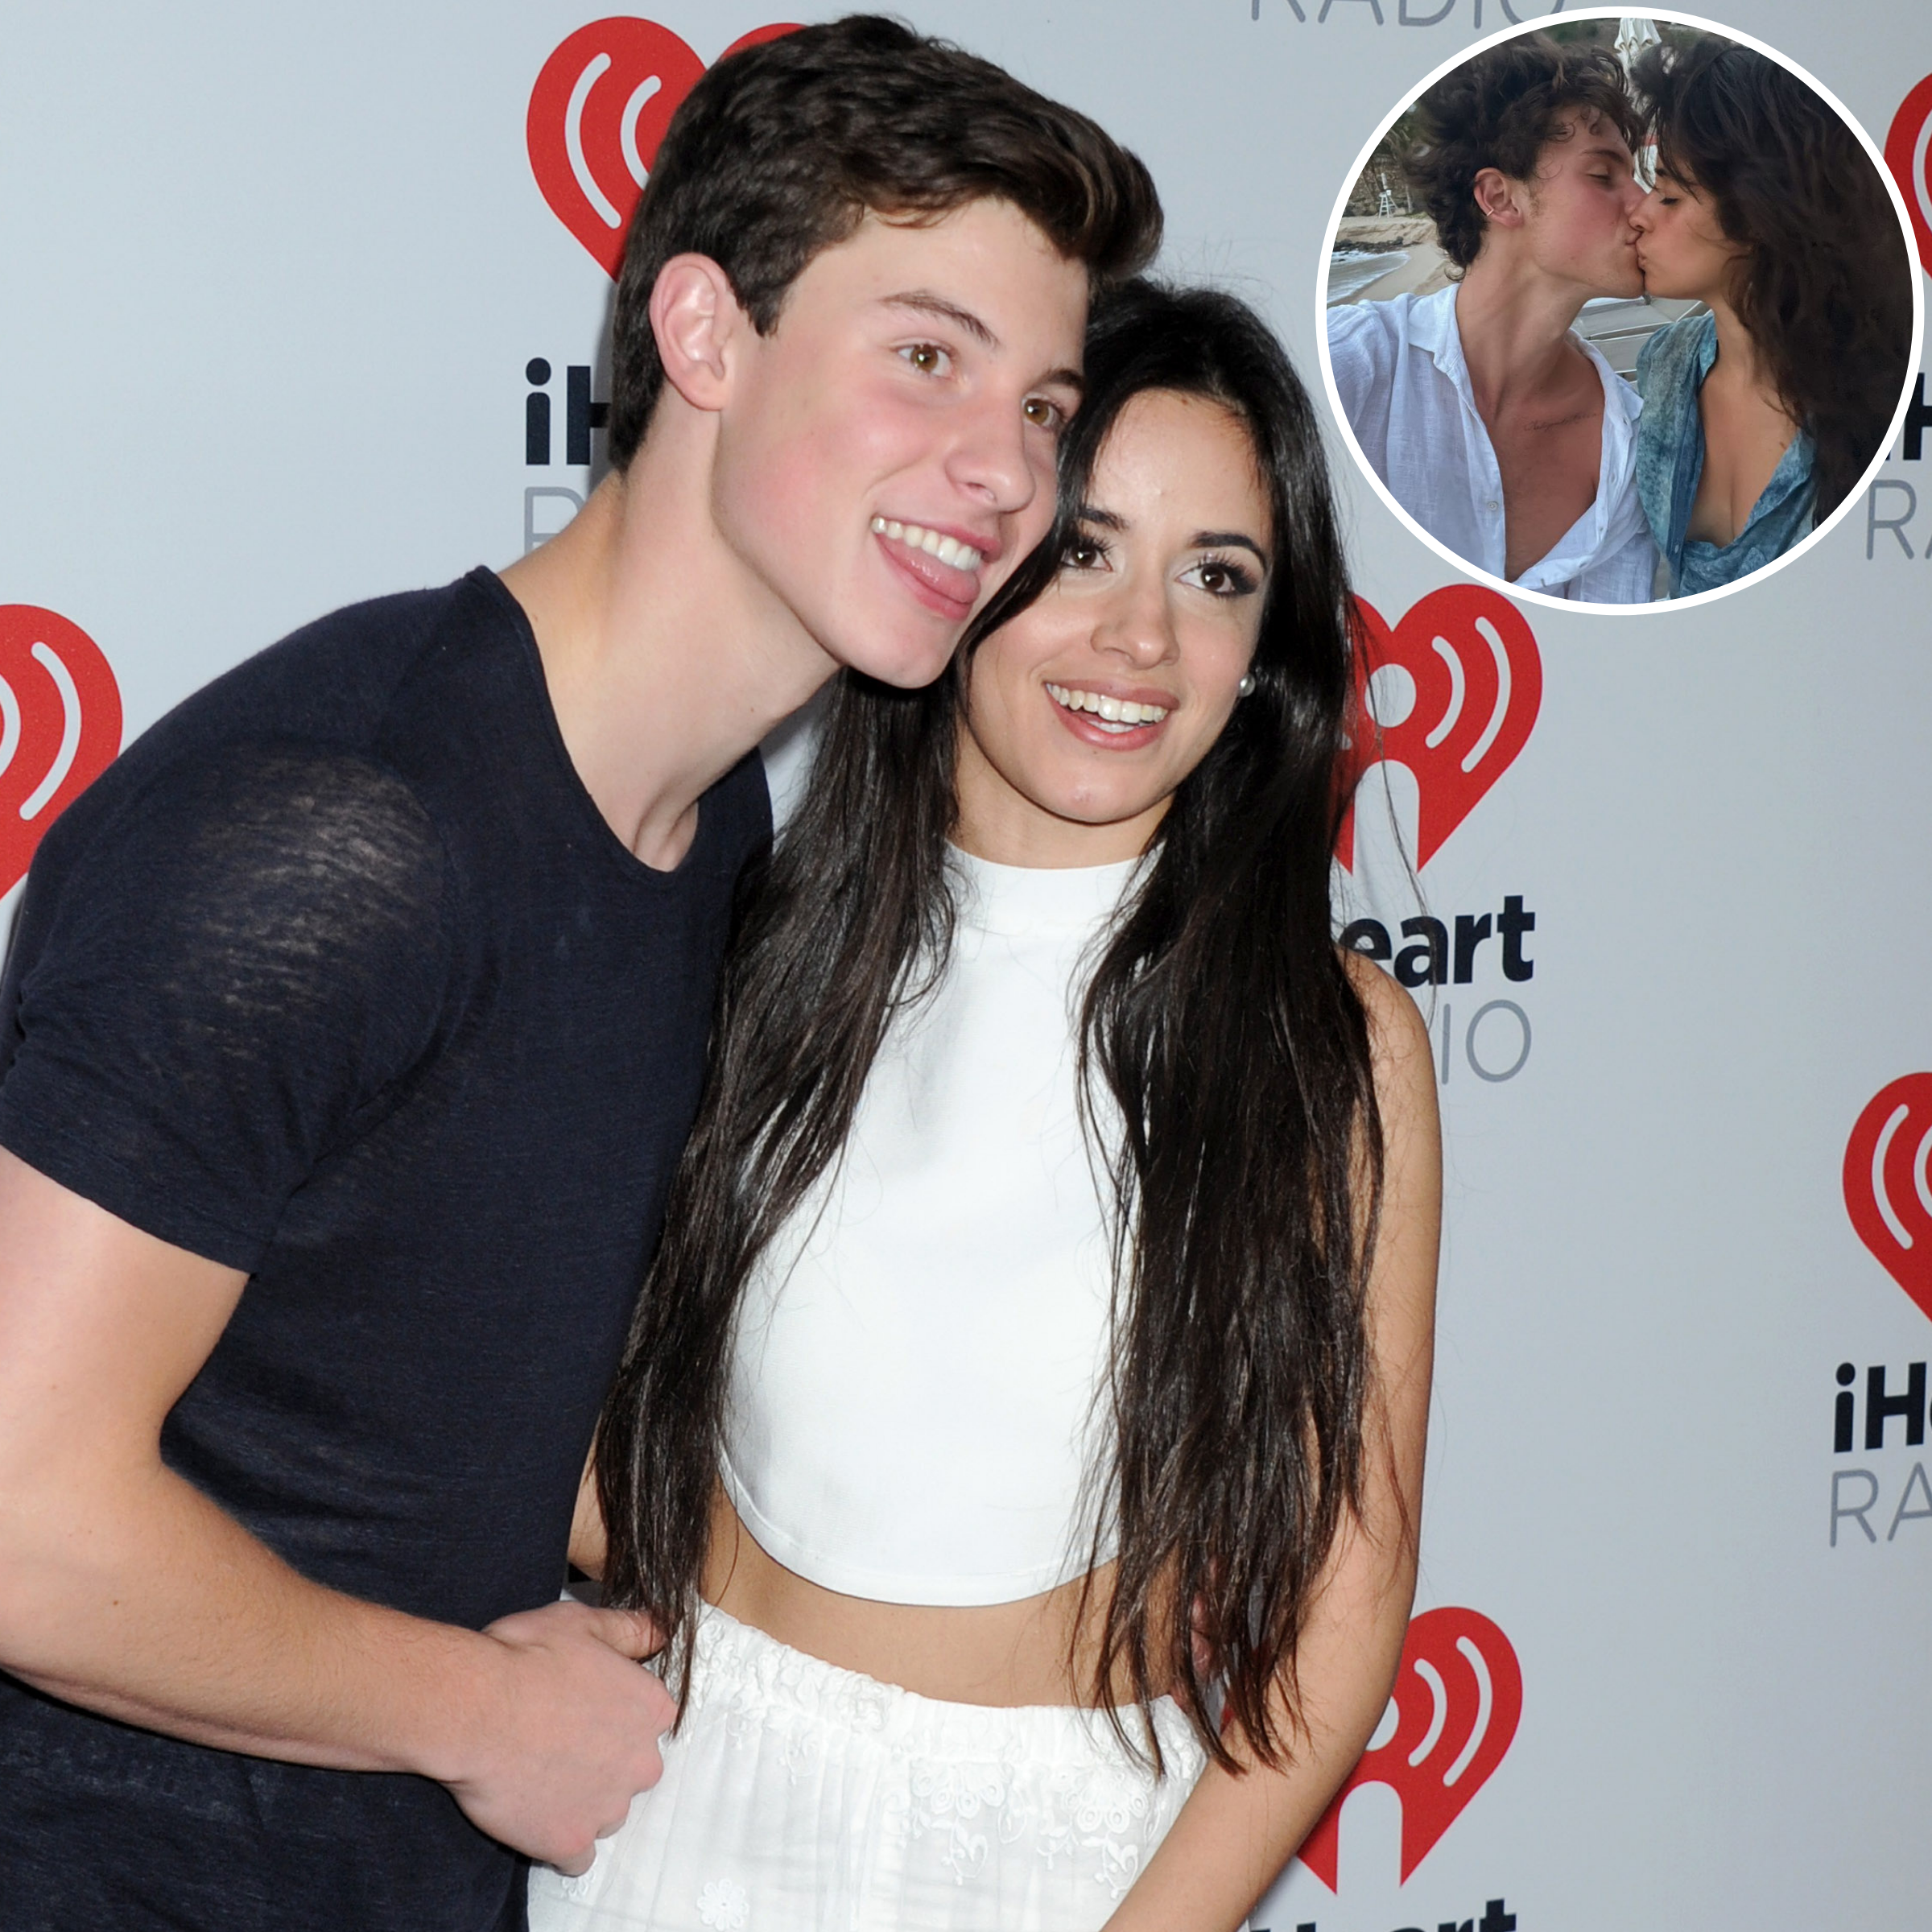 Camila Cabello and Shawn Mendes Relationship Timeline